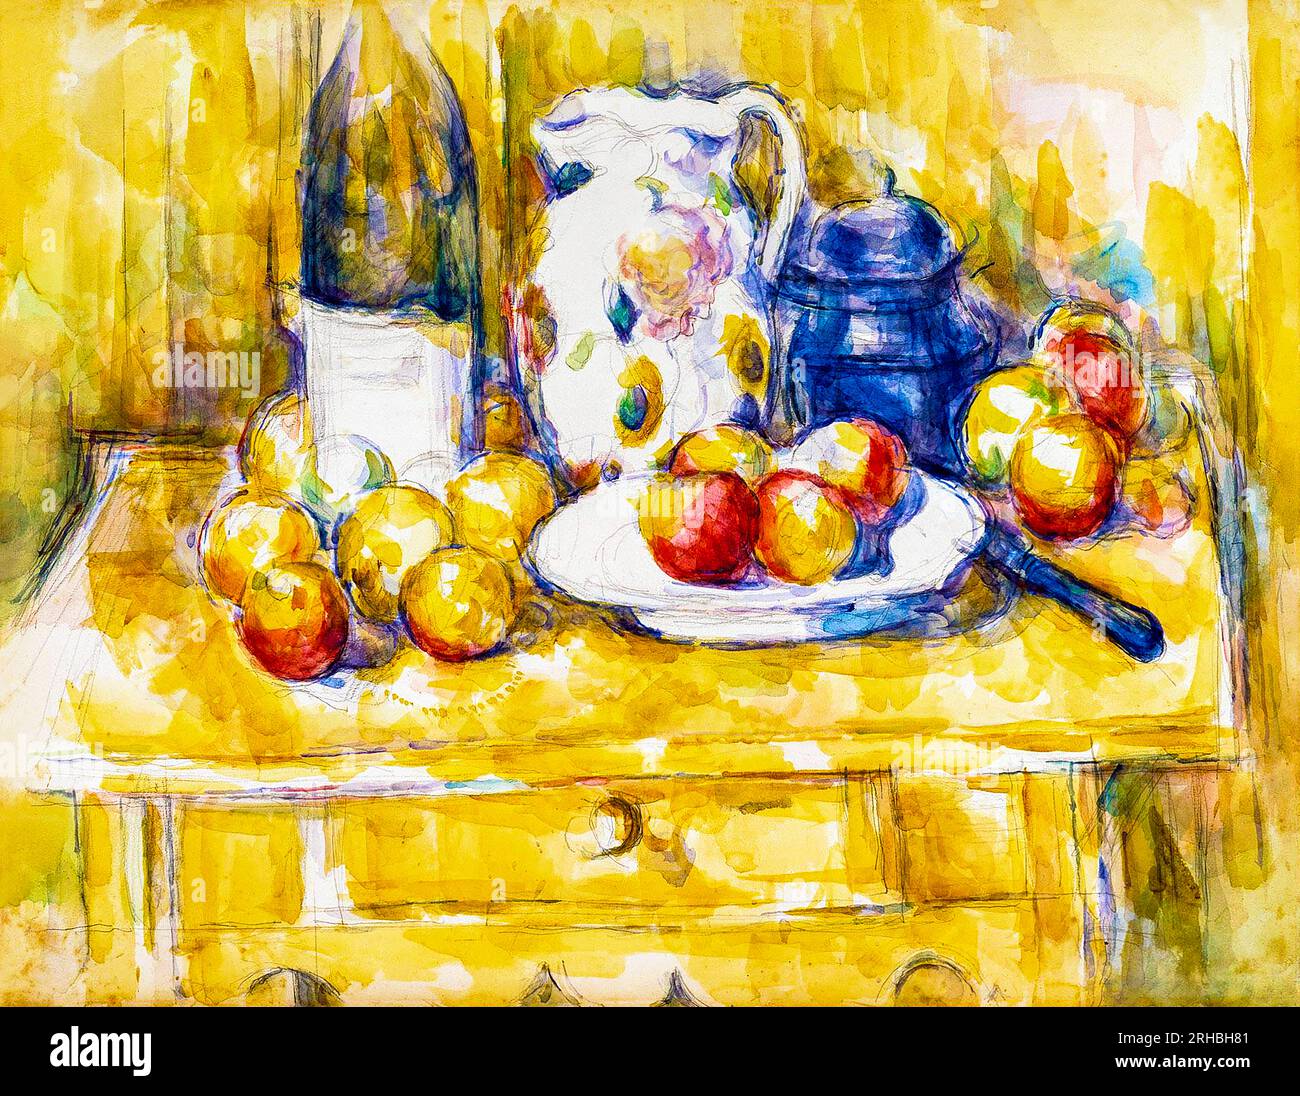 Paul Cezanne's Apples on a Sideboard  still life painting. Original from the Dallas Museum of Art. Stock Photo